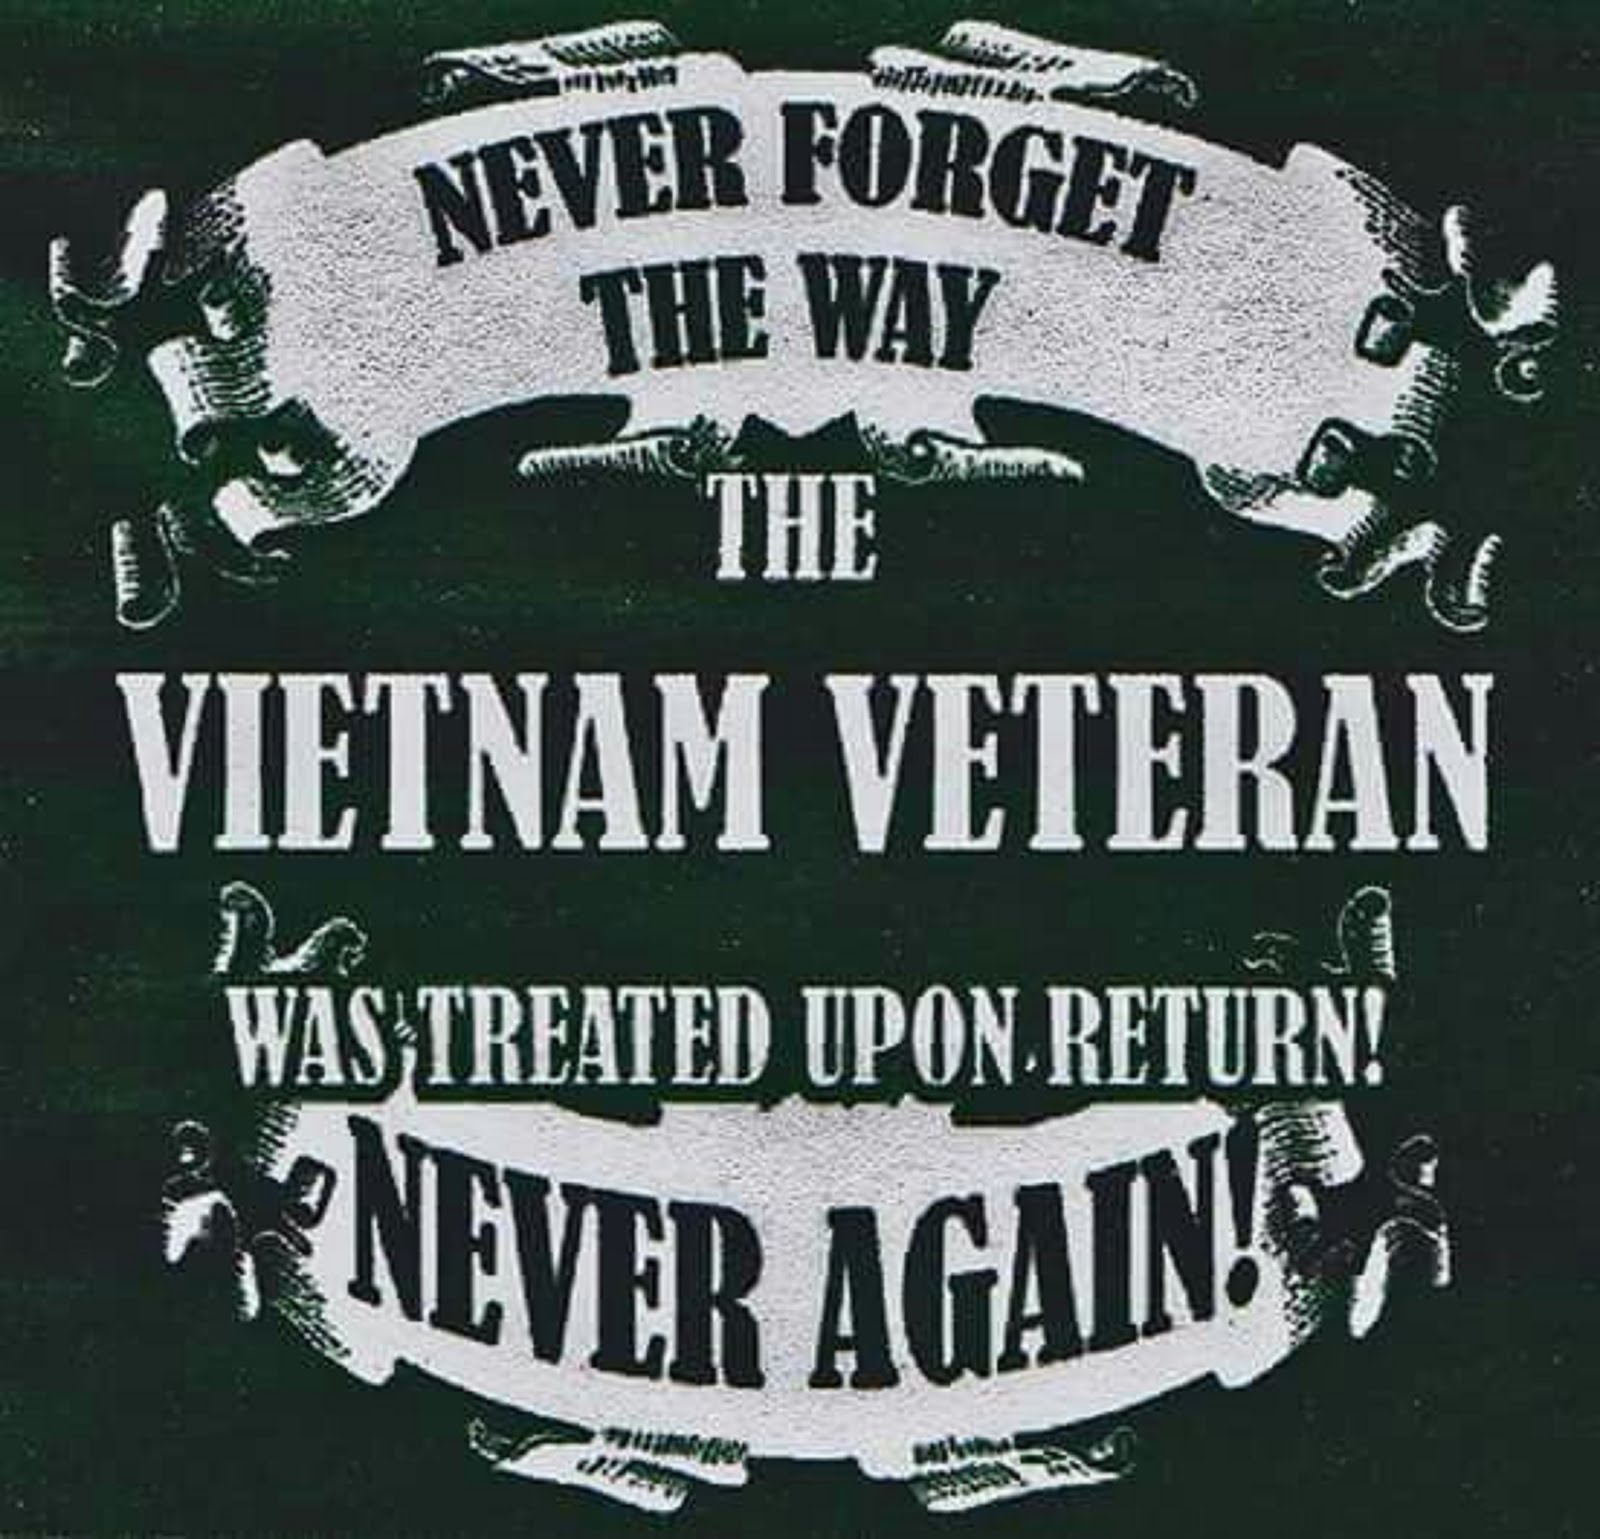 NEVER FORGET - NEVER AGAIN!